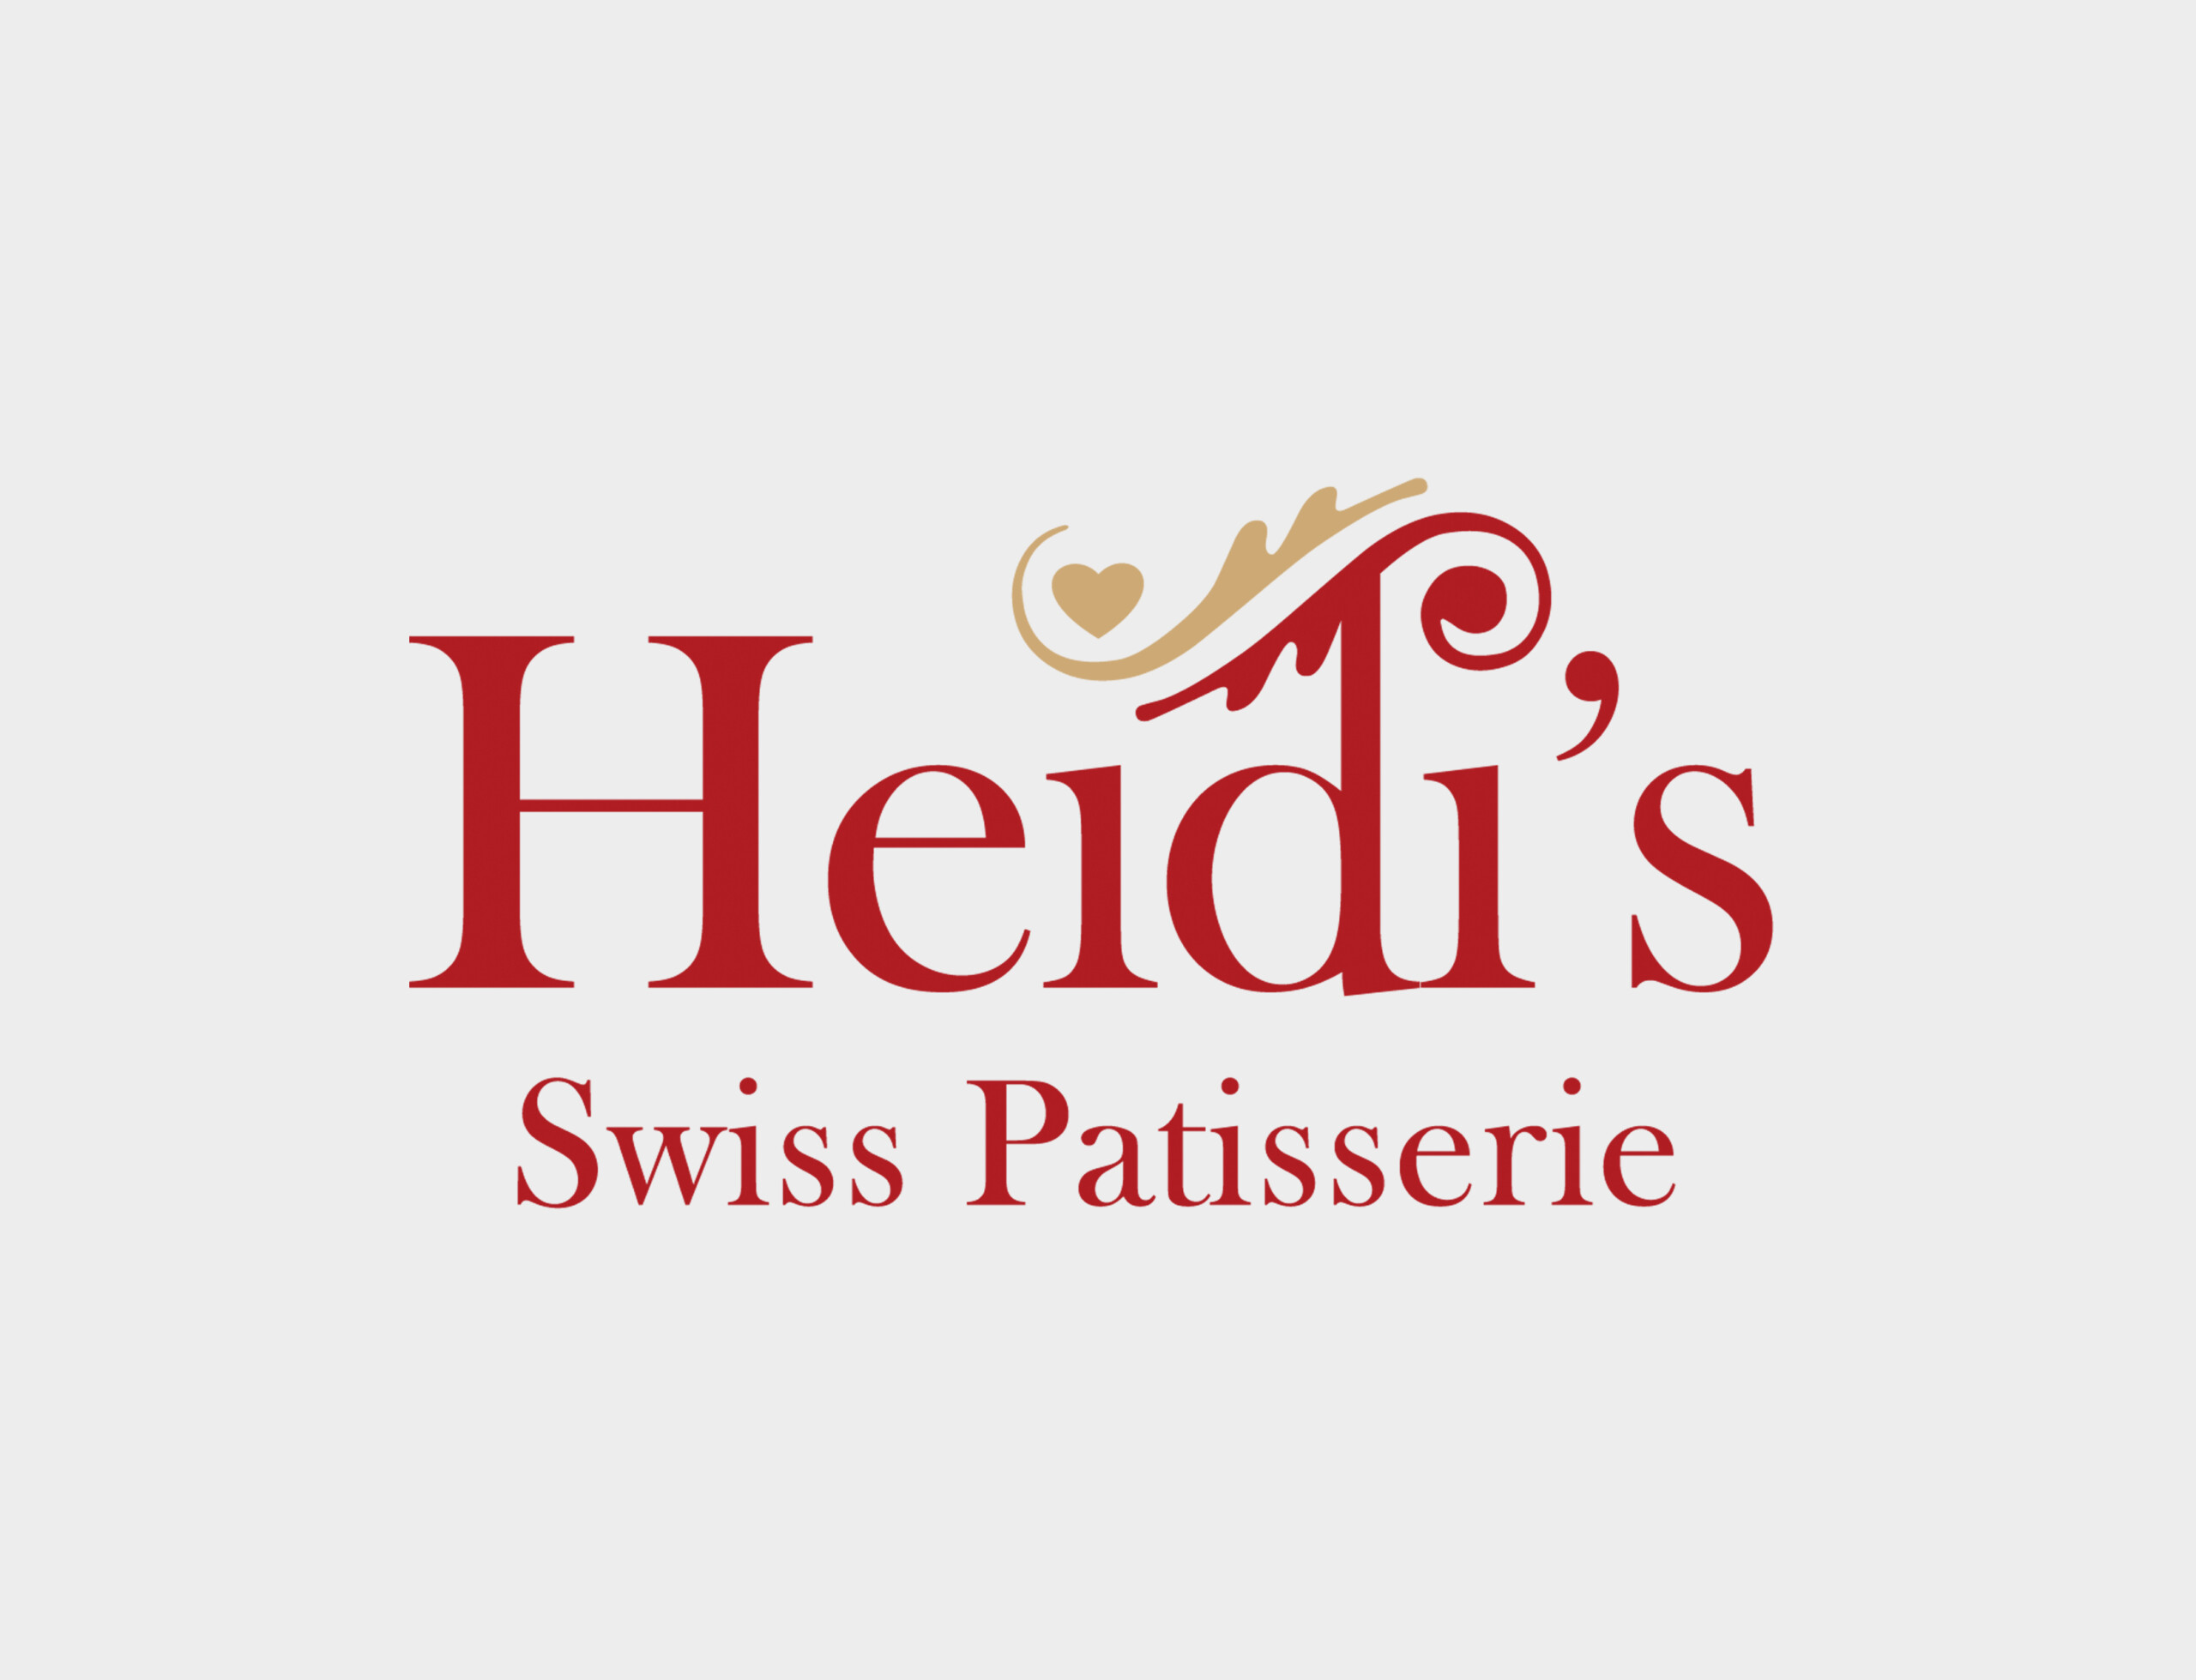 Logo design for a chain of patisseries based in Hampshire.